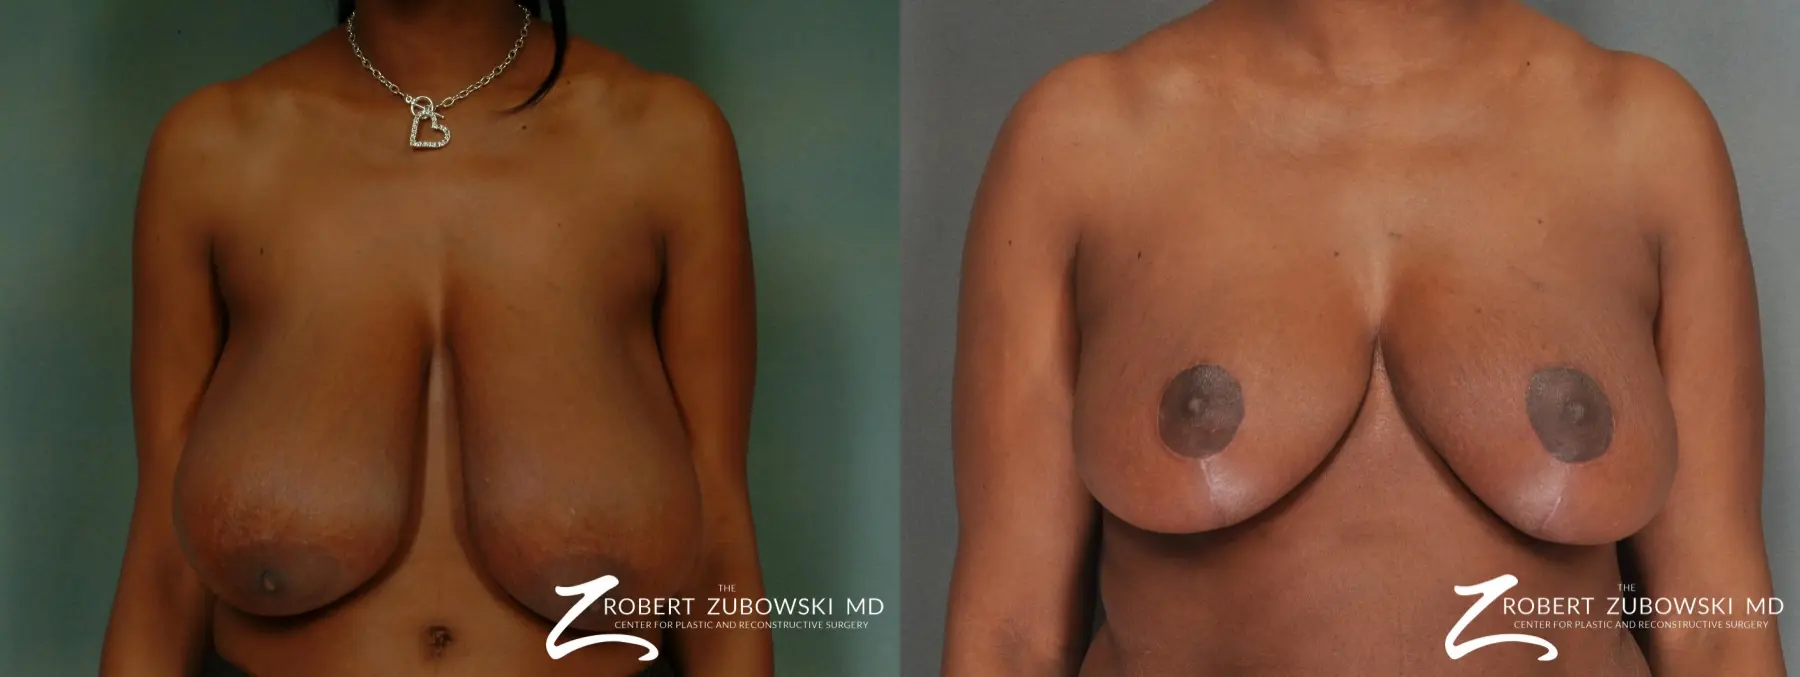 Breast Reduction: Patient 21 - Before and After 1